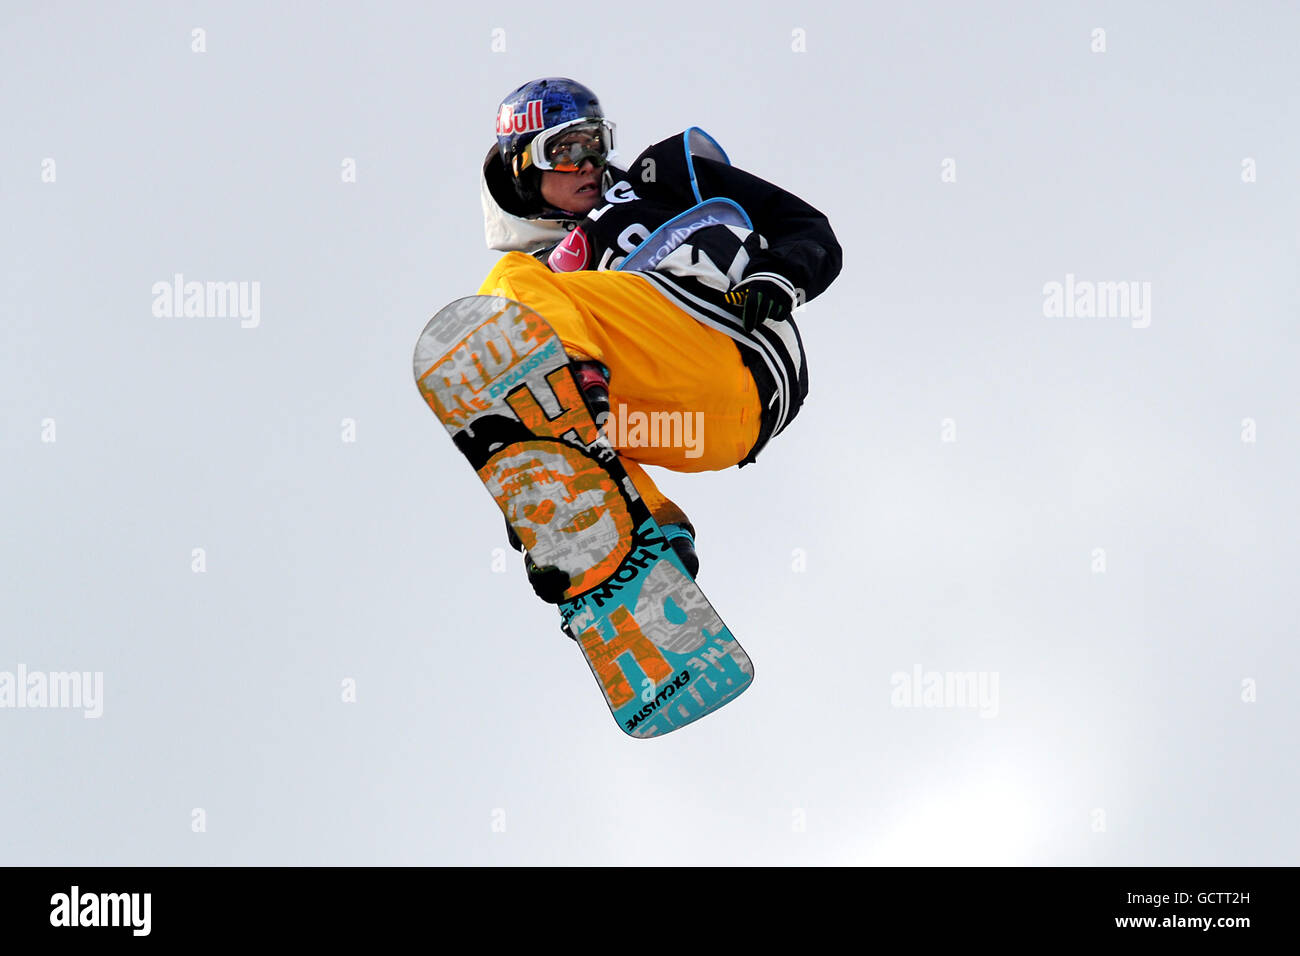 Sebastien Toutant of Canada during the LG Snowboard FIS World Cup in London Stock Photo